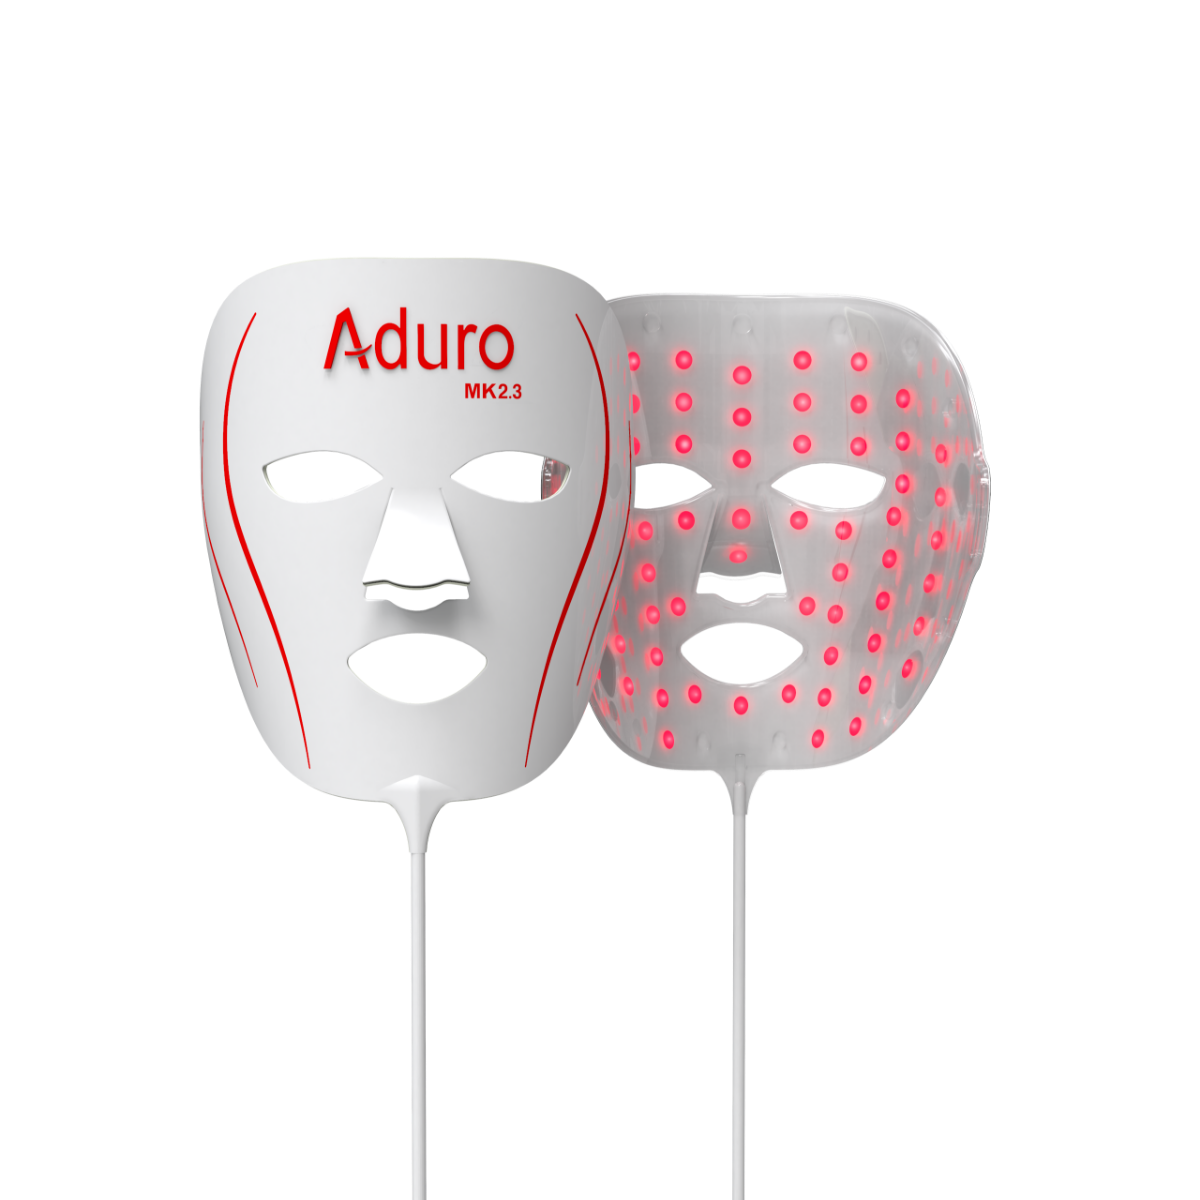 Aduro Facial Mask. Unlock radiant skin with Aduro's red away mode. Experience the soothing power of Aduro's skin soother.